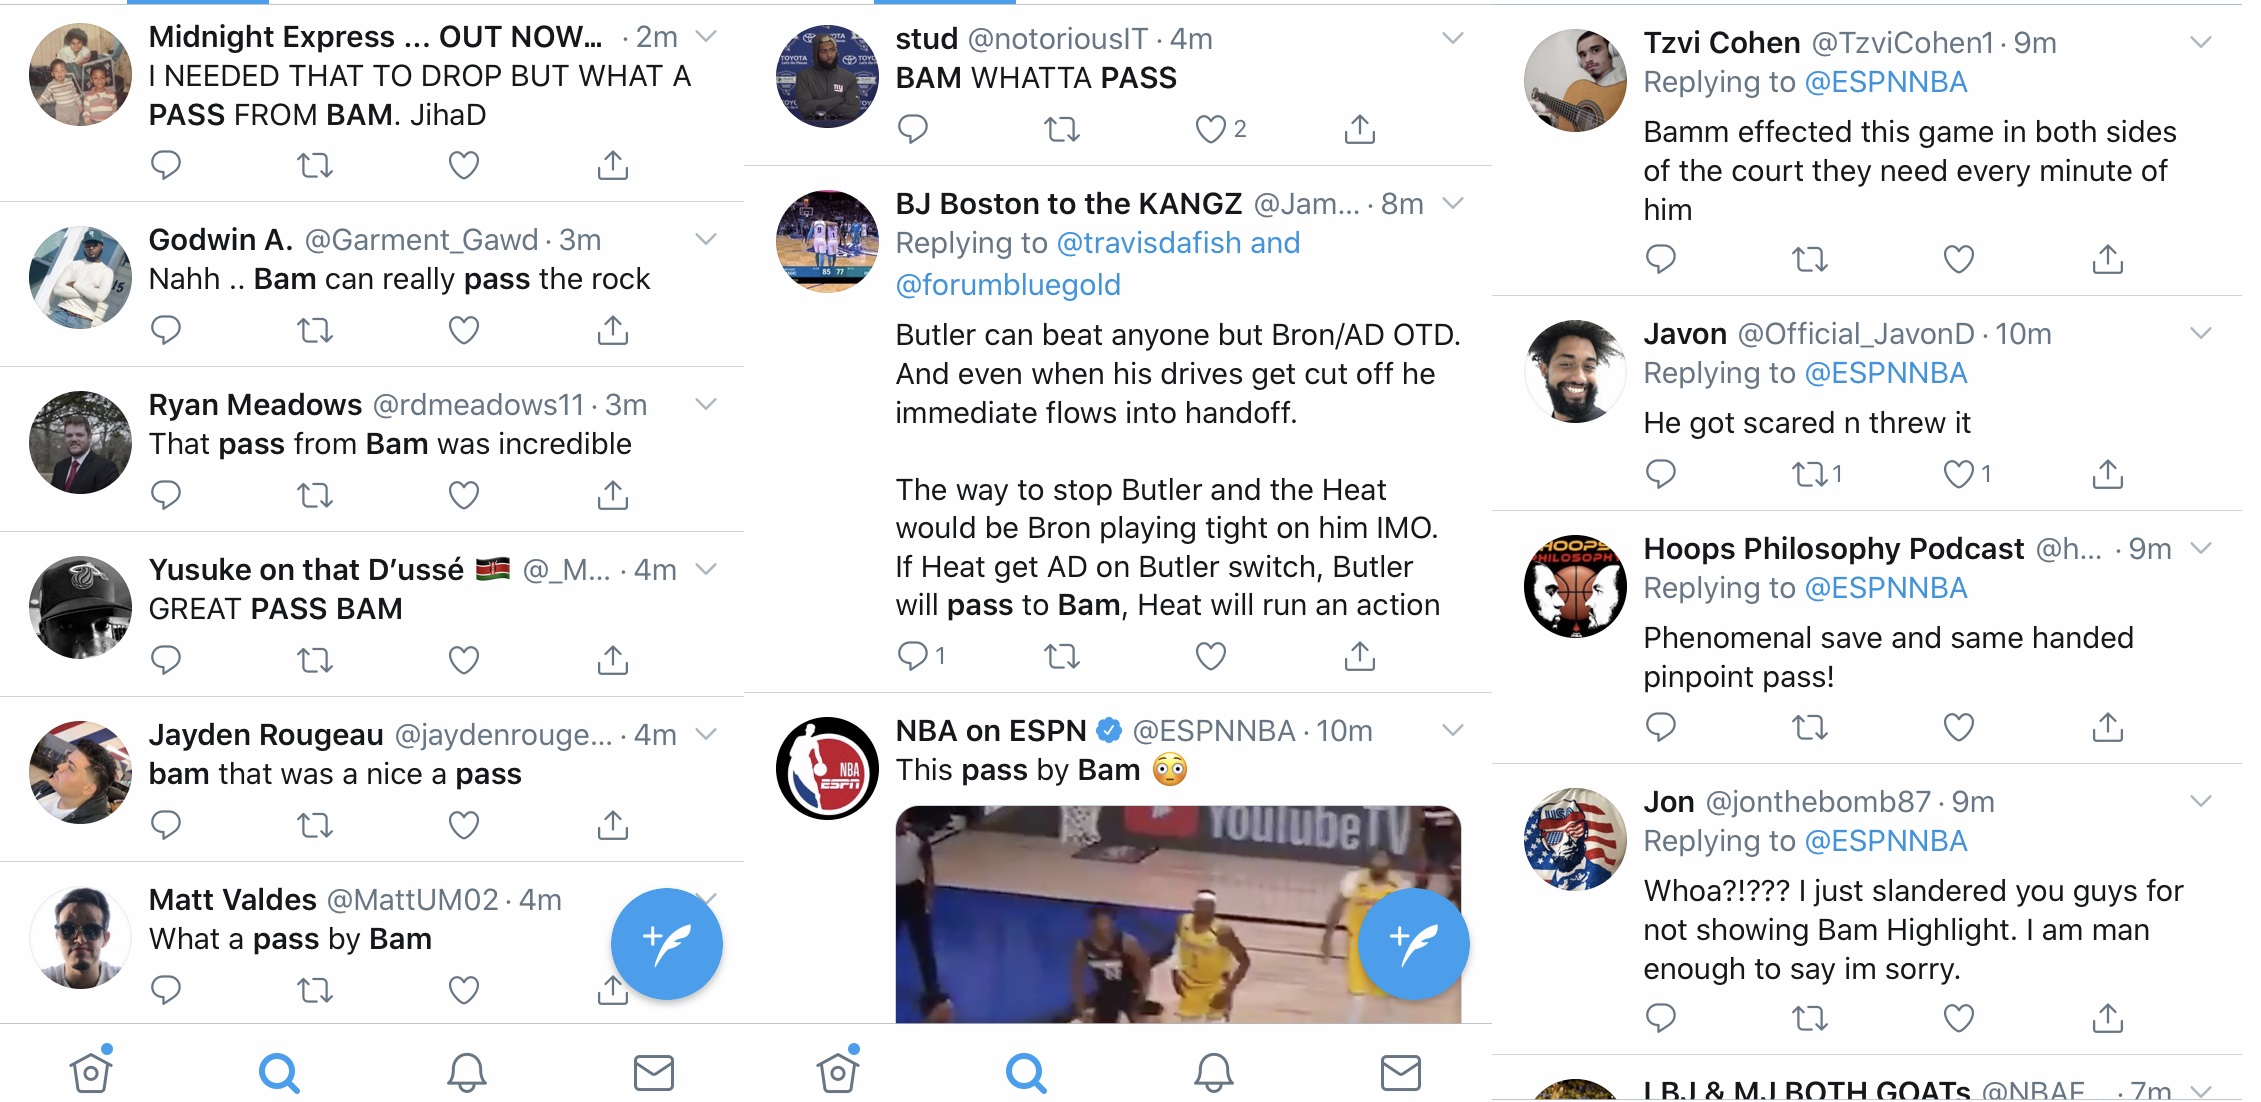 Bam Adebayo is definitely a different kind of center. Back in the day, a lot was said about Shaq's passing abilities. But, what Bam did in tonight's game definitely has Twitter going crazy.